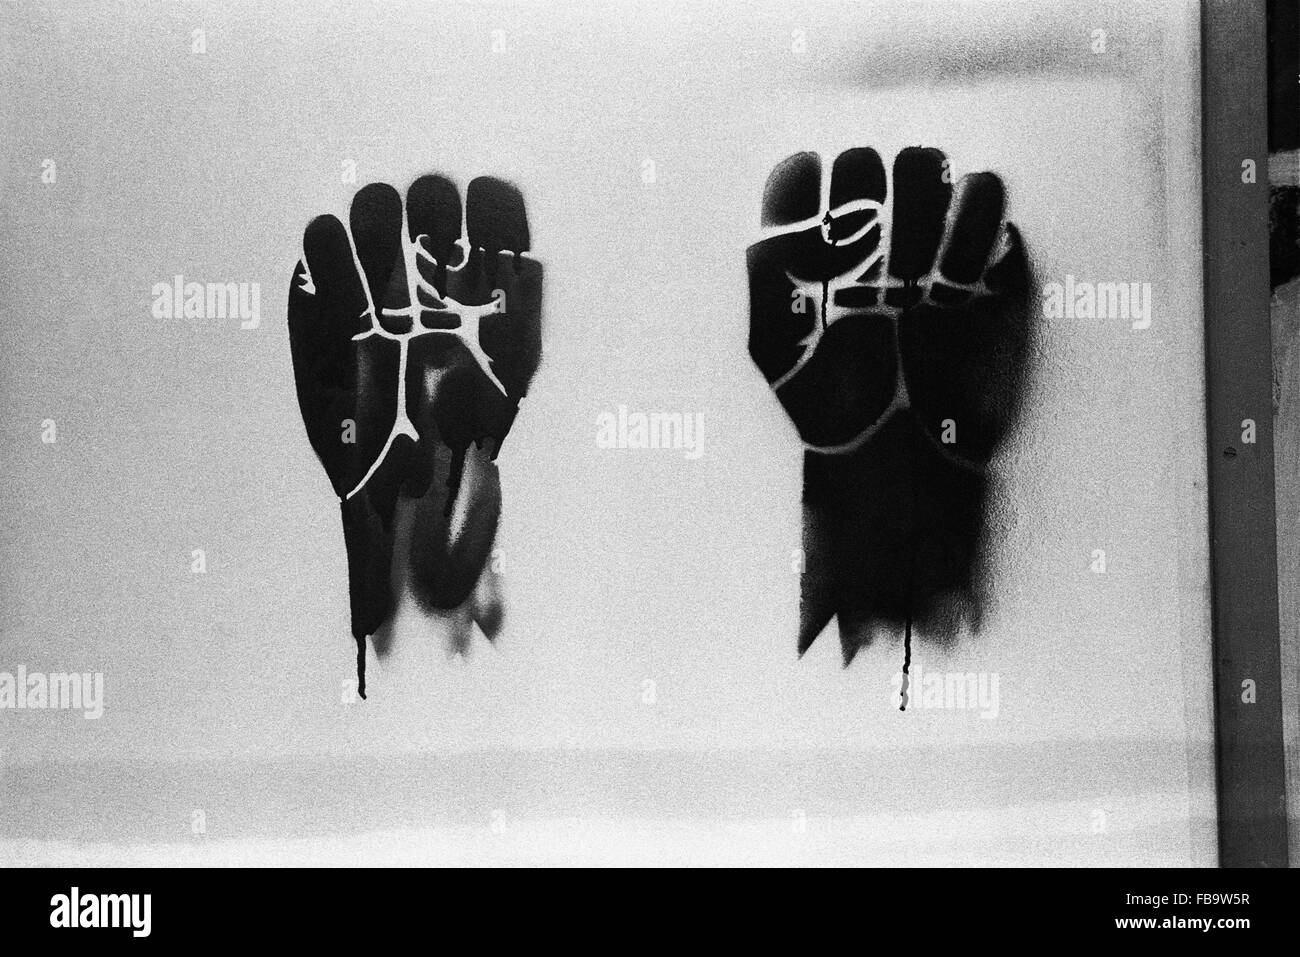 1968 events. -    -  1968 events. -  2 fists: A symbol of the protest movement in 1968.   -  Philippe Gras / Le Pictorium Stock Photo